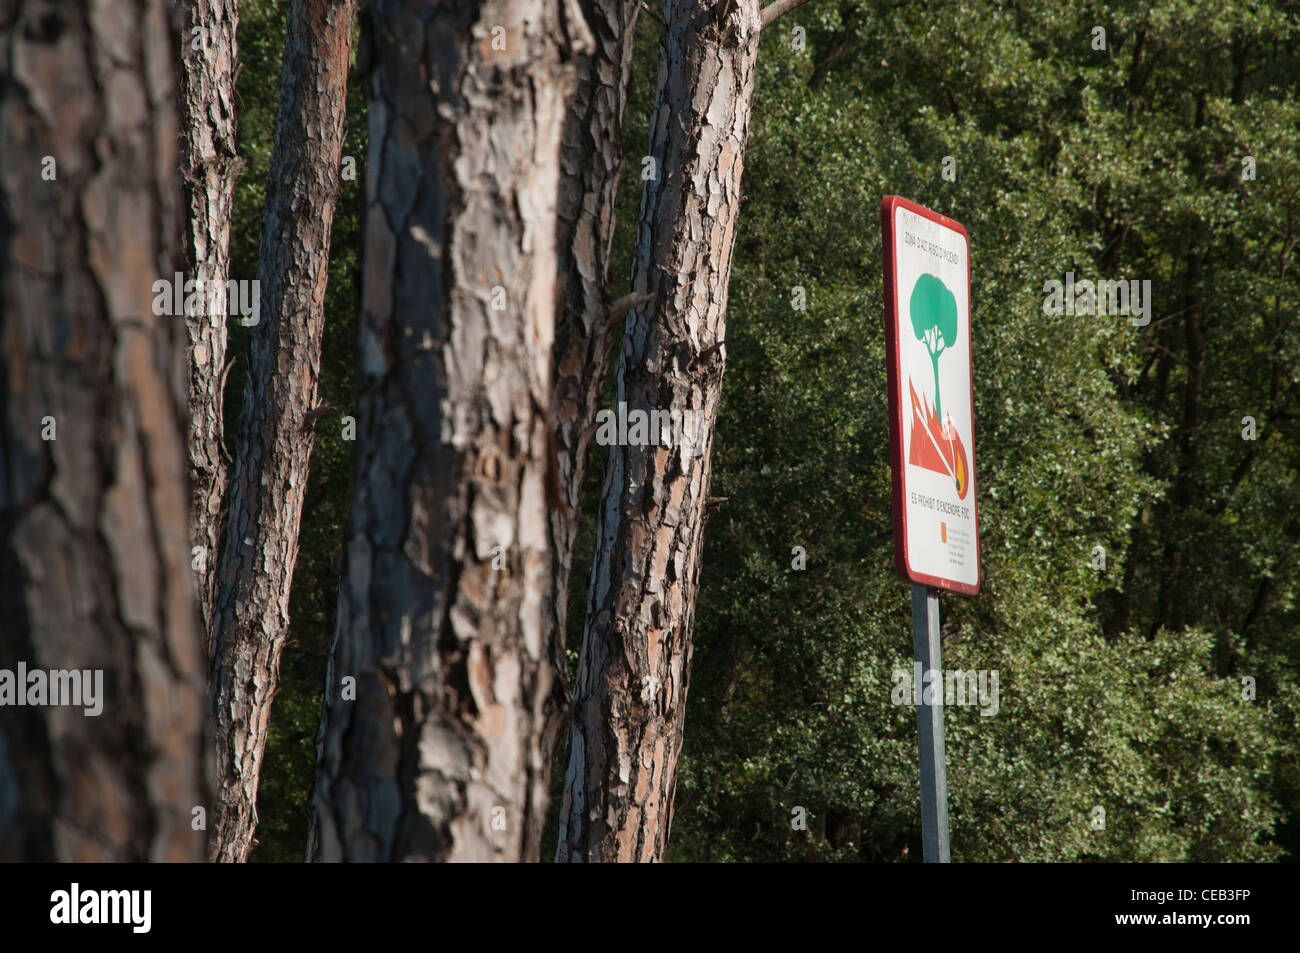 Pine tree forest and Catalan language sign warning about risk of wild fires, Lleida, Spain Stock Photo